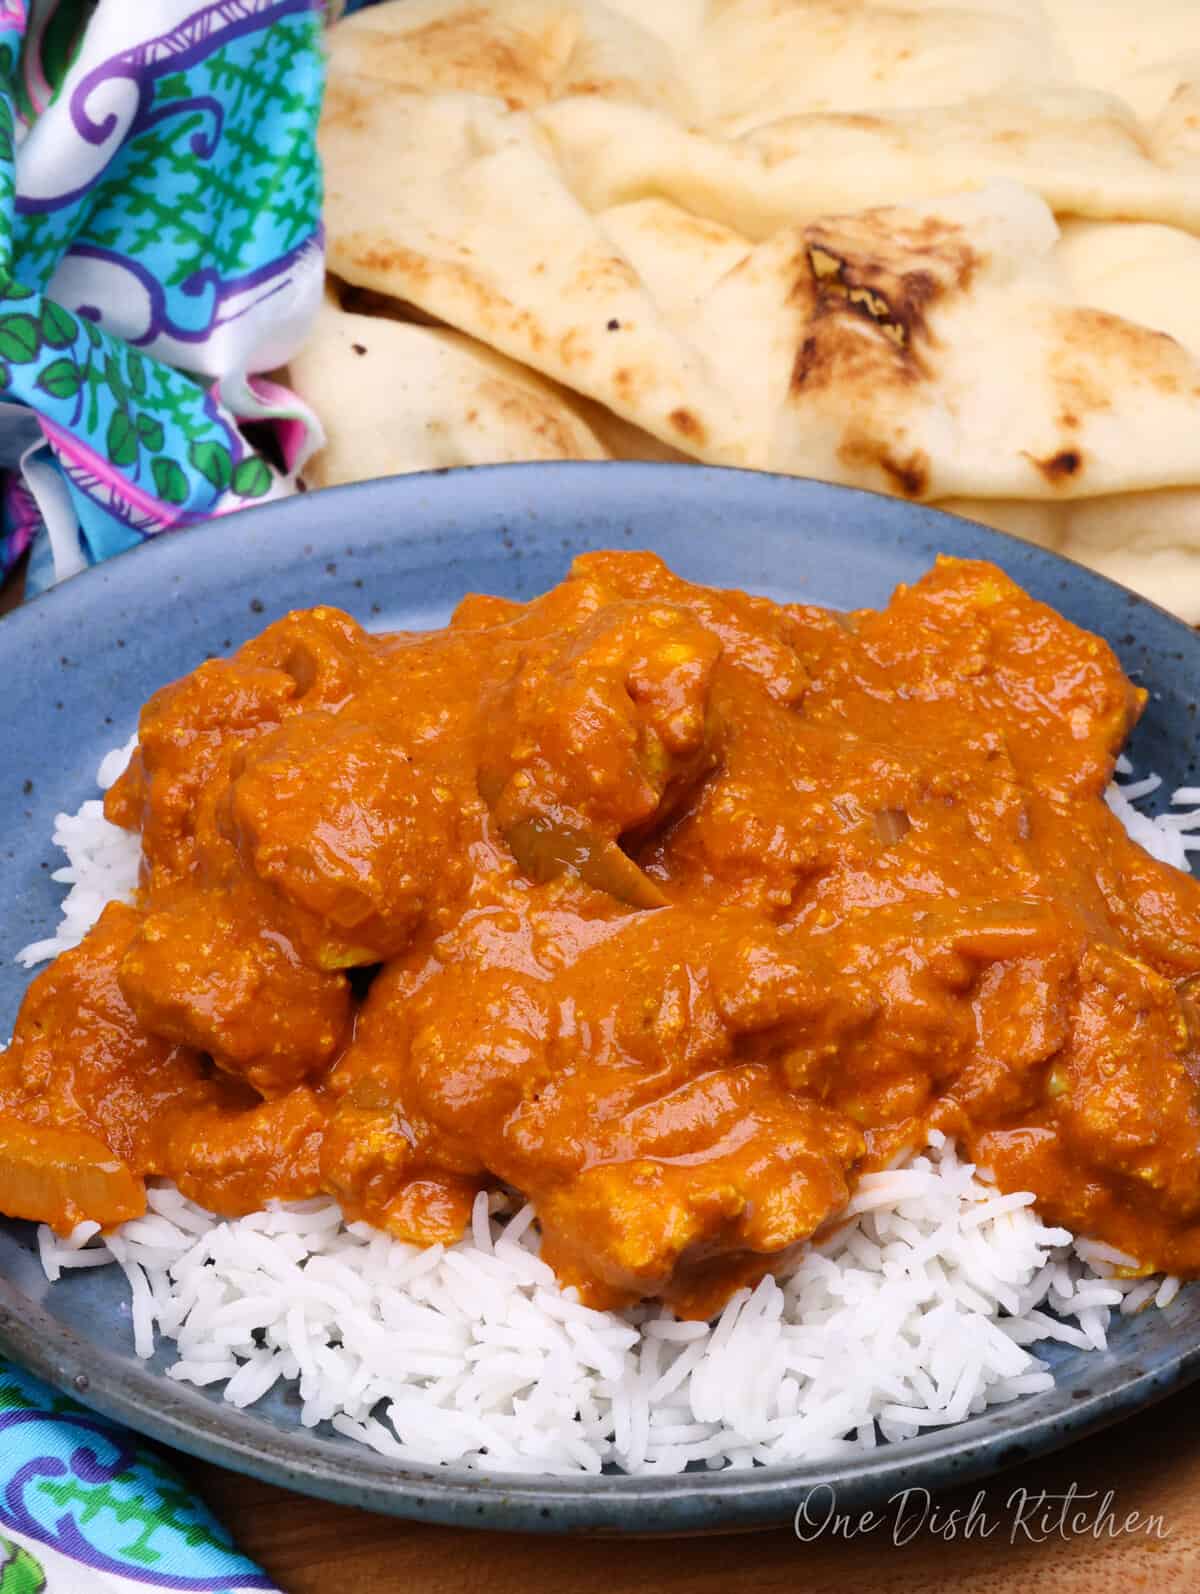 chicken tikka masala over white rice on a blue plate next to a plate of naan.